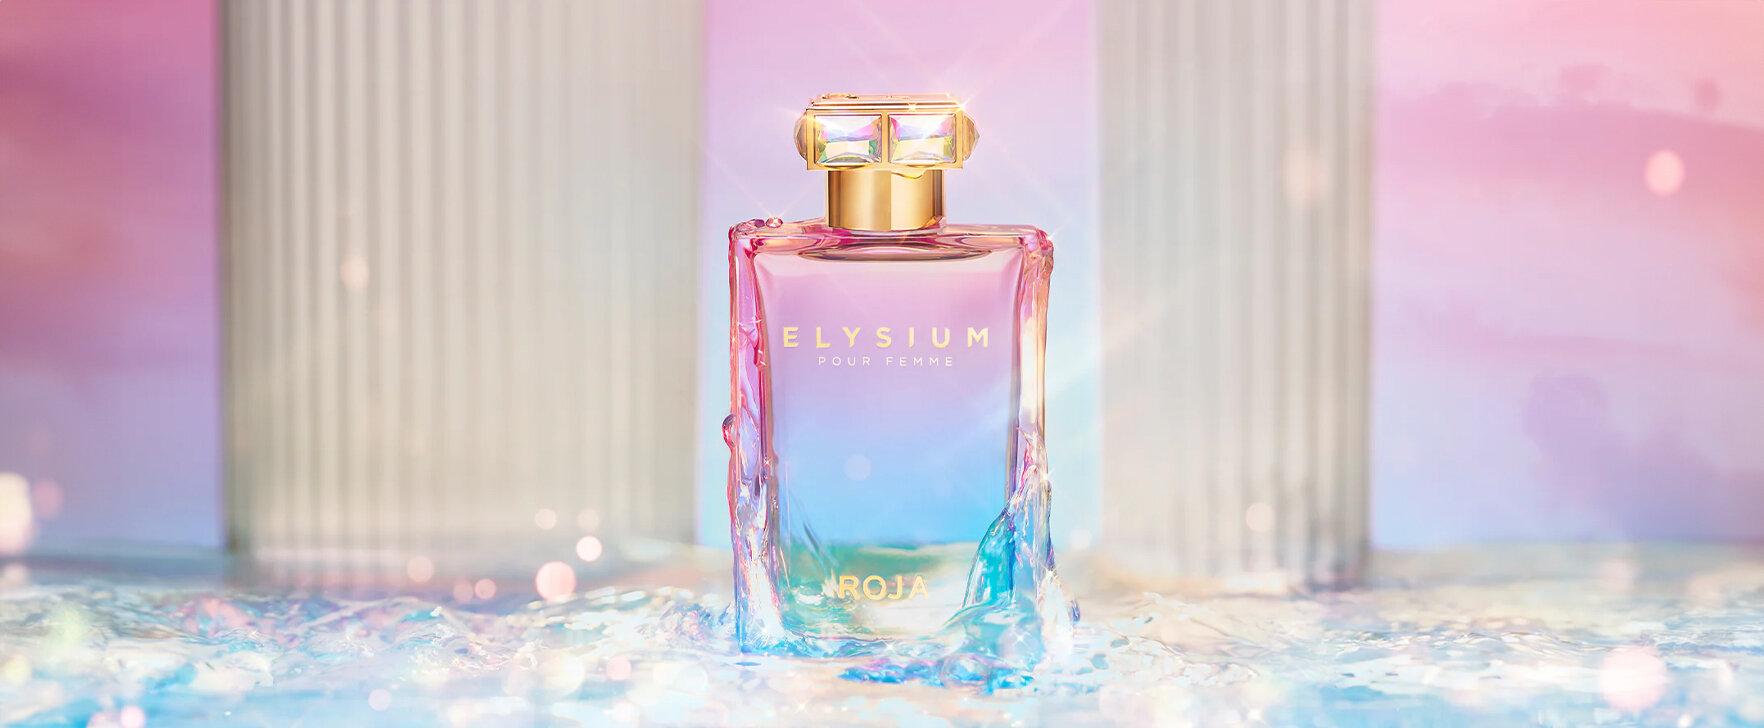 Inspired by Strength and Independence: The New Eau de Parfum Elysium Pour Femme by Roja Parfums